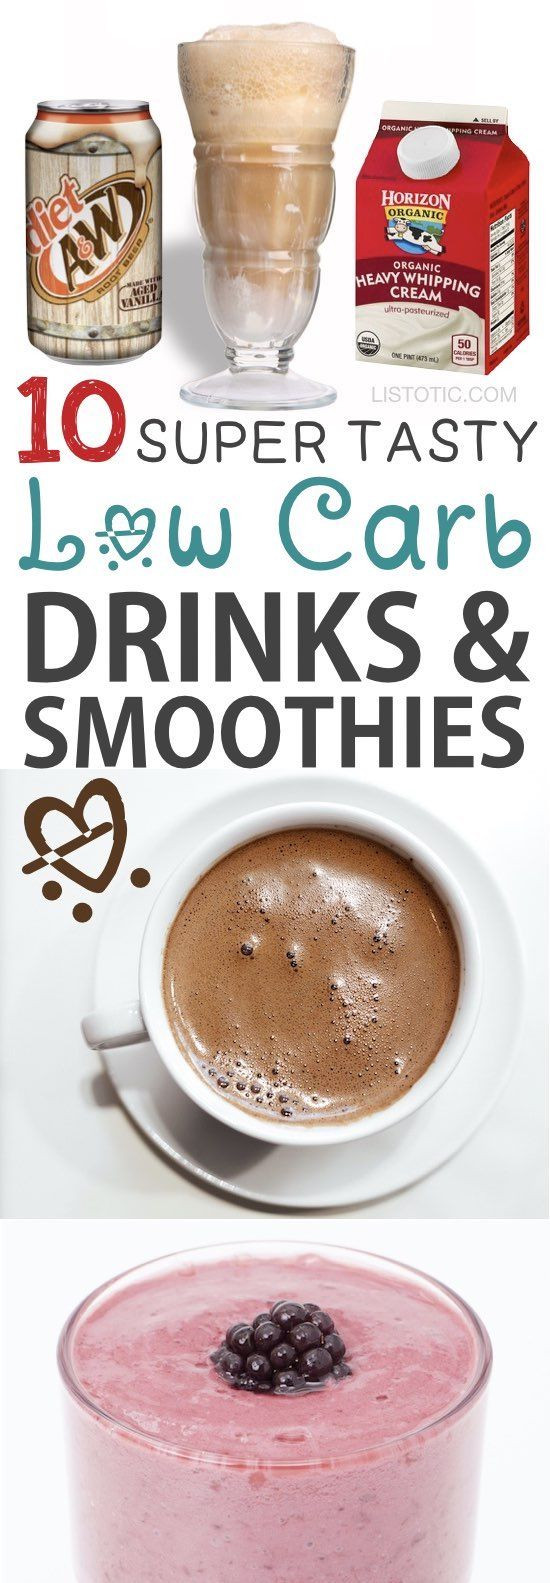 Low Carb Smoothies Atkins
 Best 25 Easy recipes ideas on Pinterest